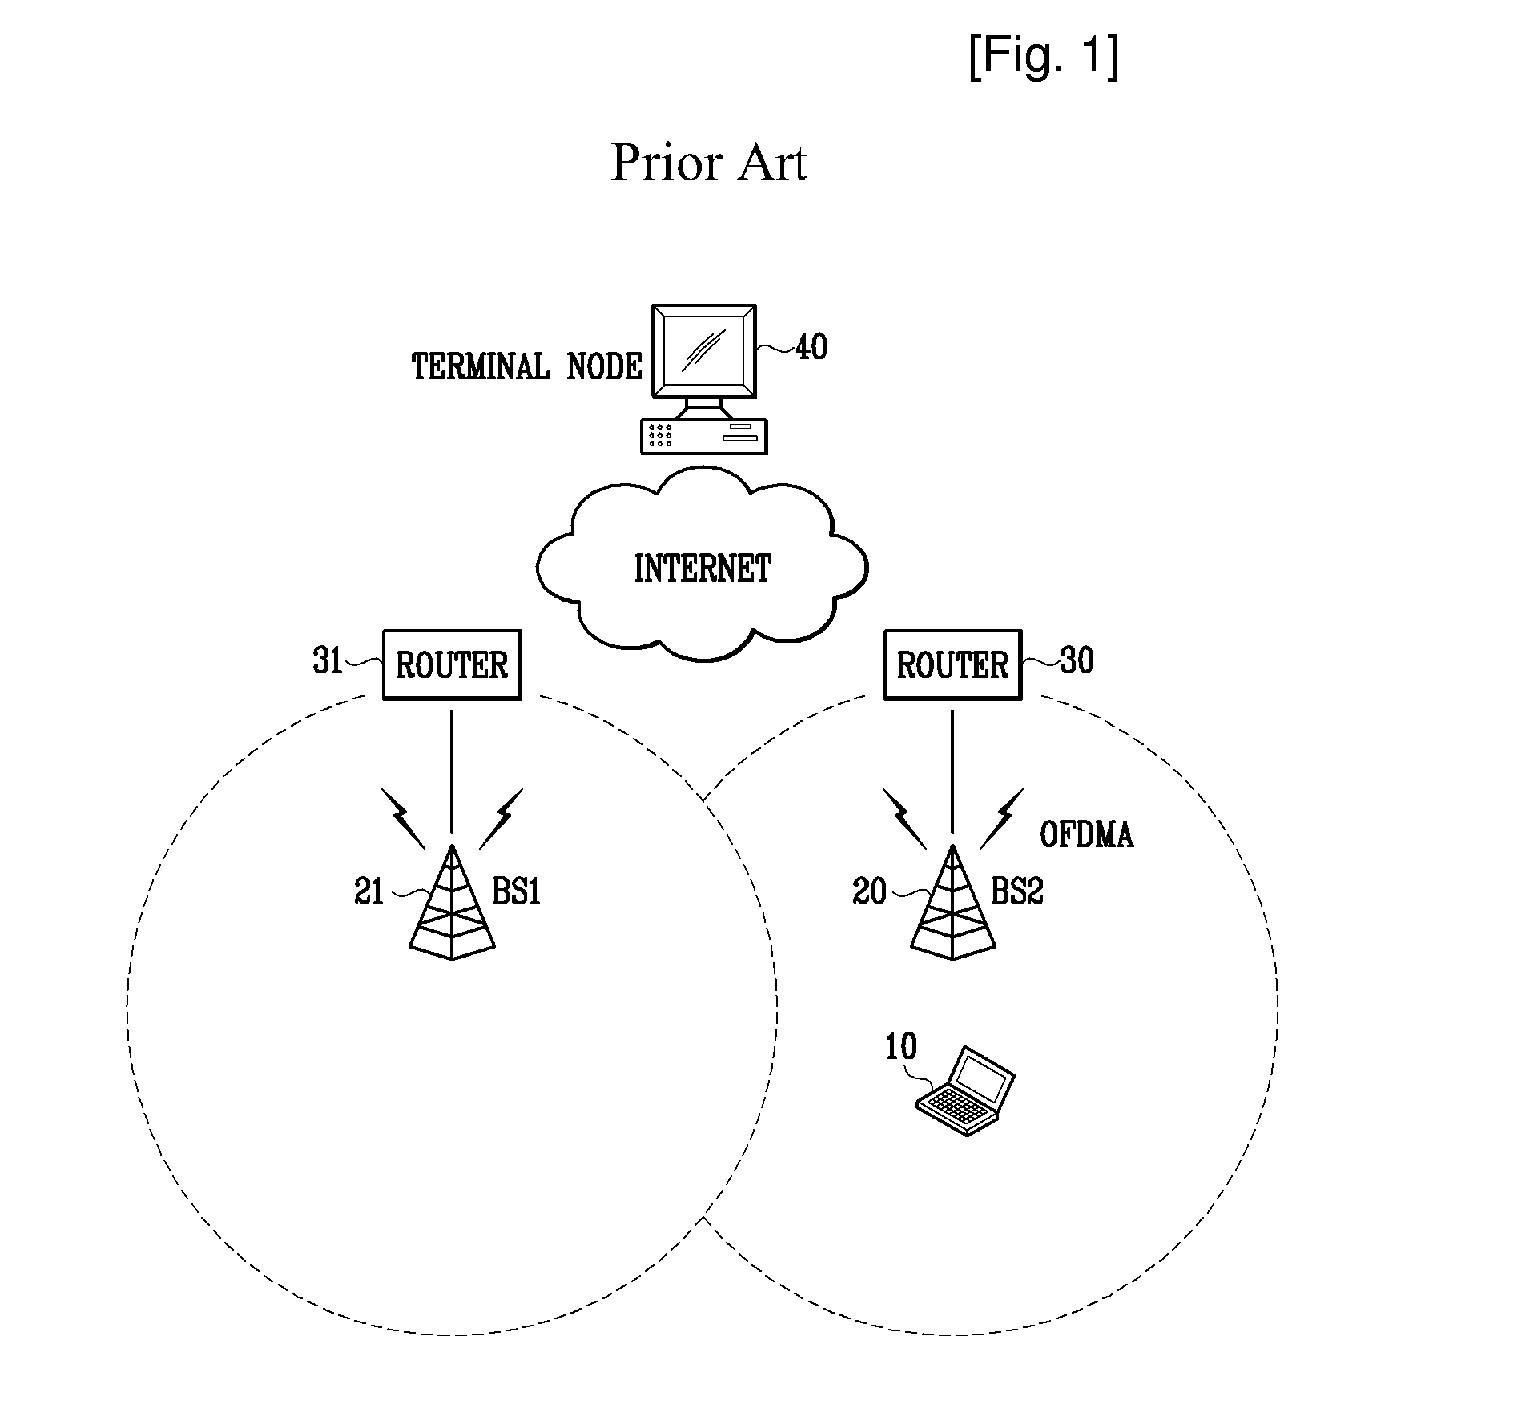 Method for Dynamic Address Allocation Using Mobile Ip in Wireless Portable Internet System